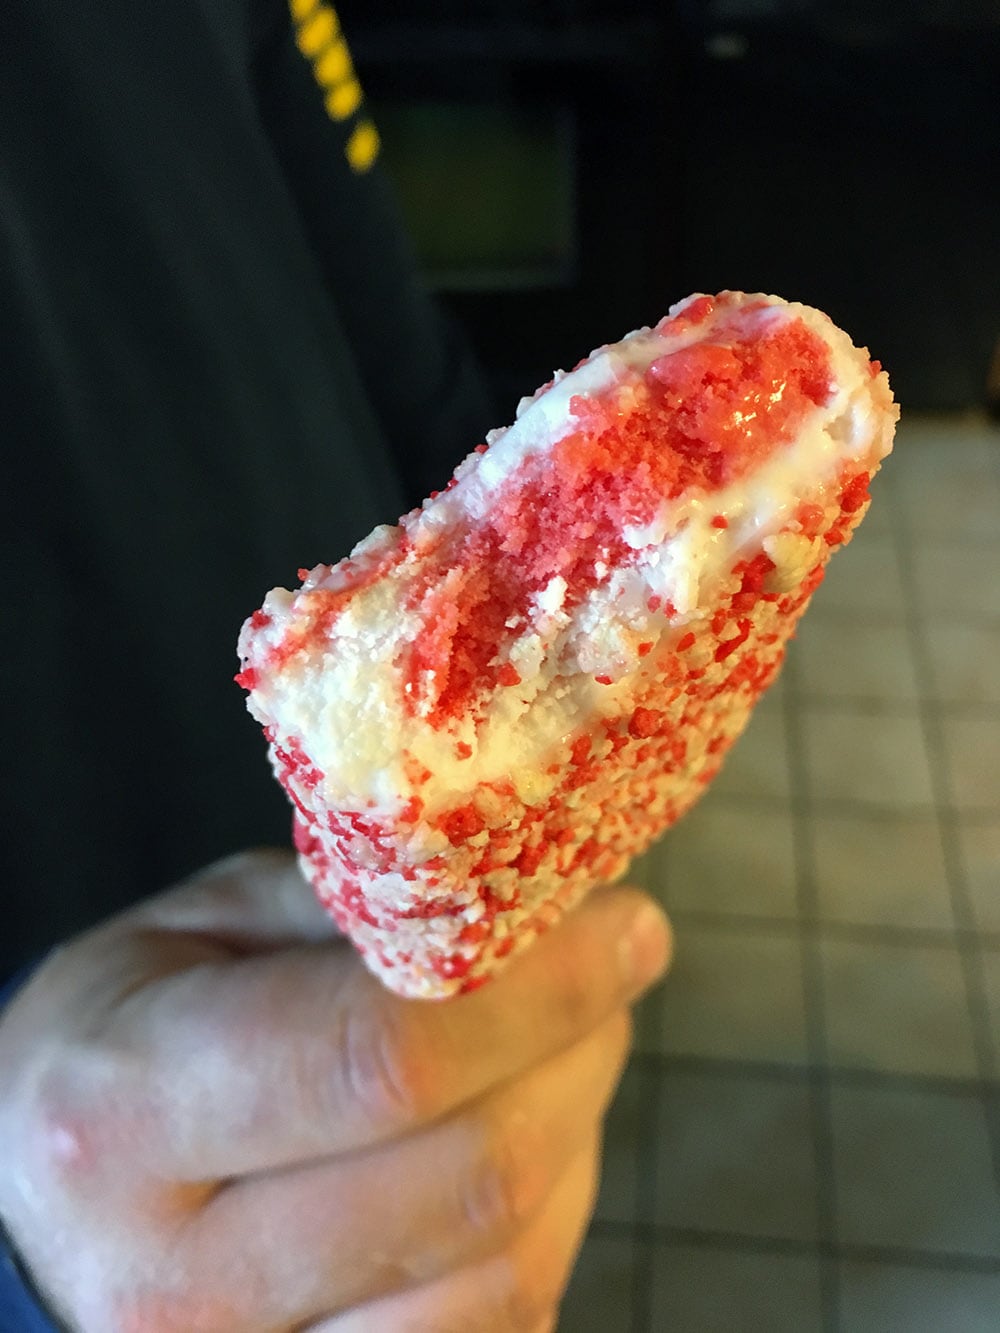 Good Humor Strawberry Shortcake with a bite taken out.